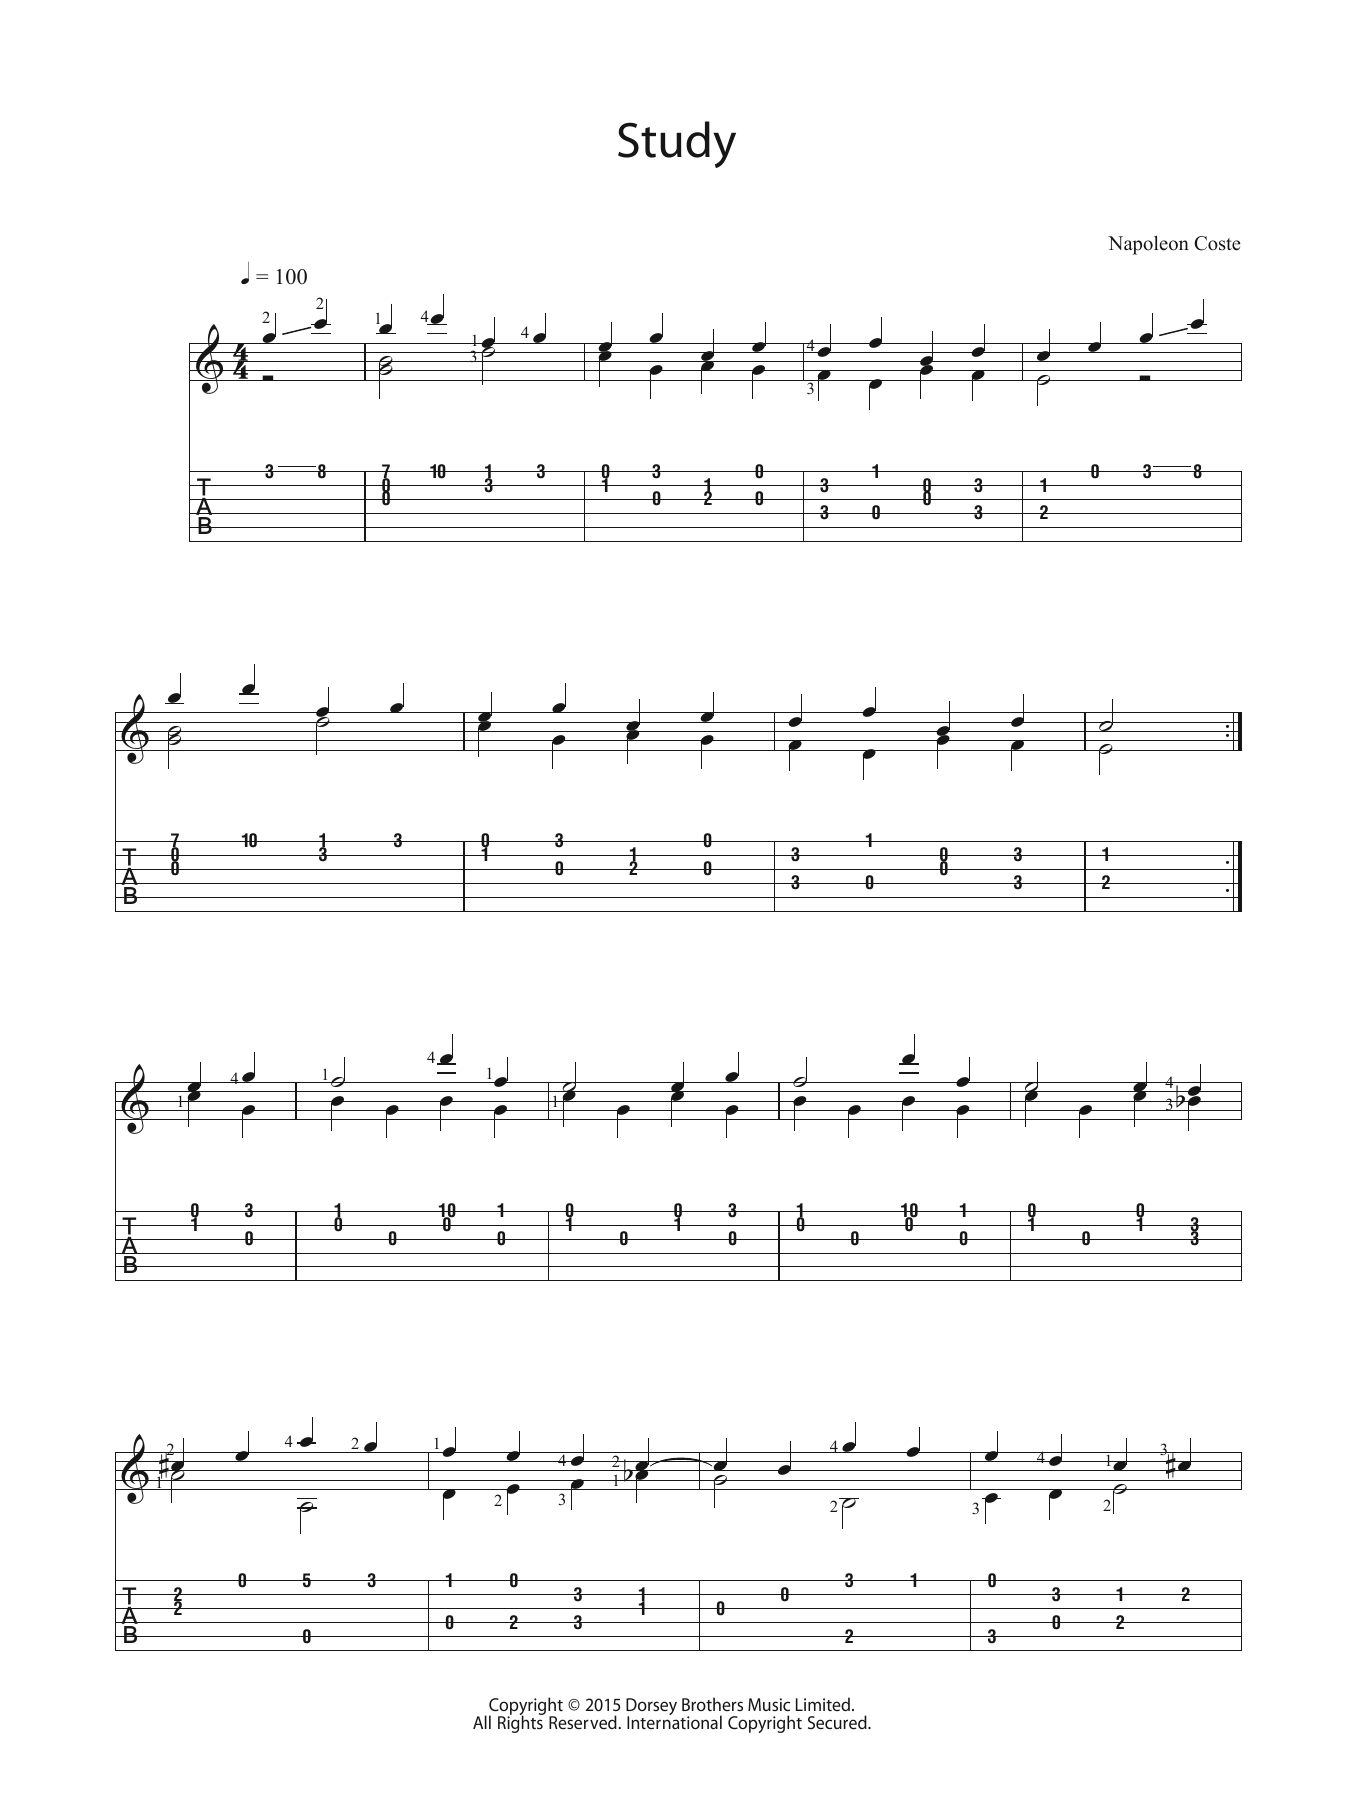 Download Napoleon Coste Study Sheet Music